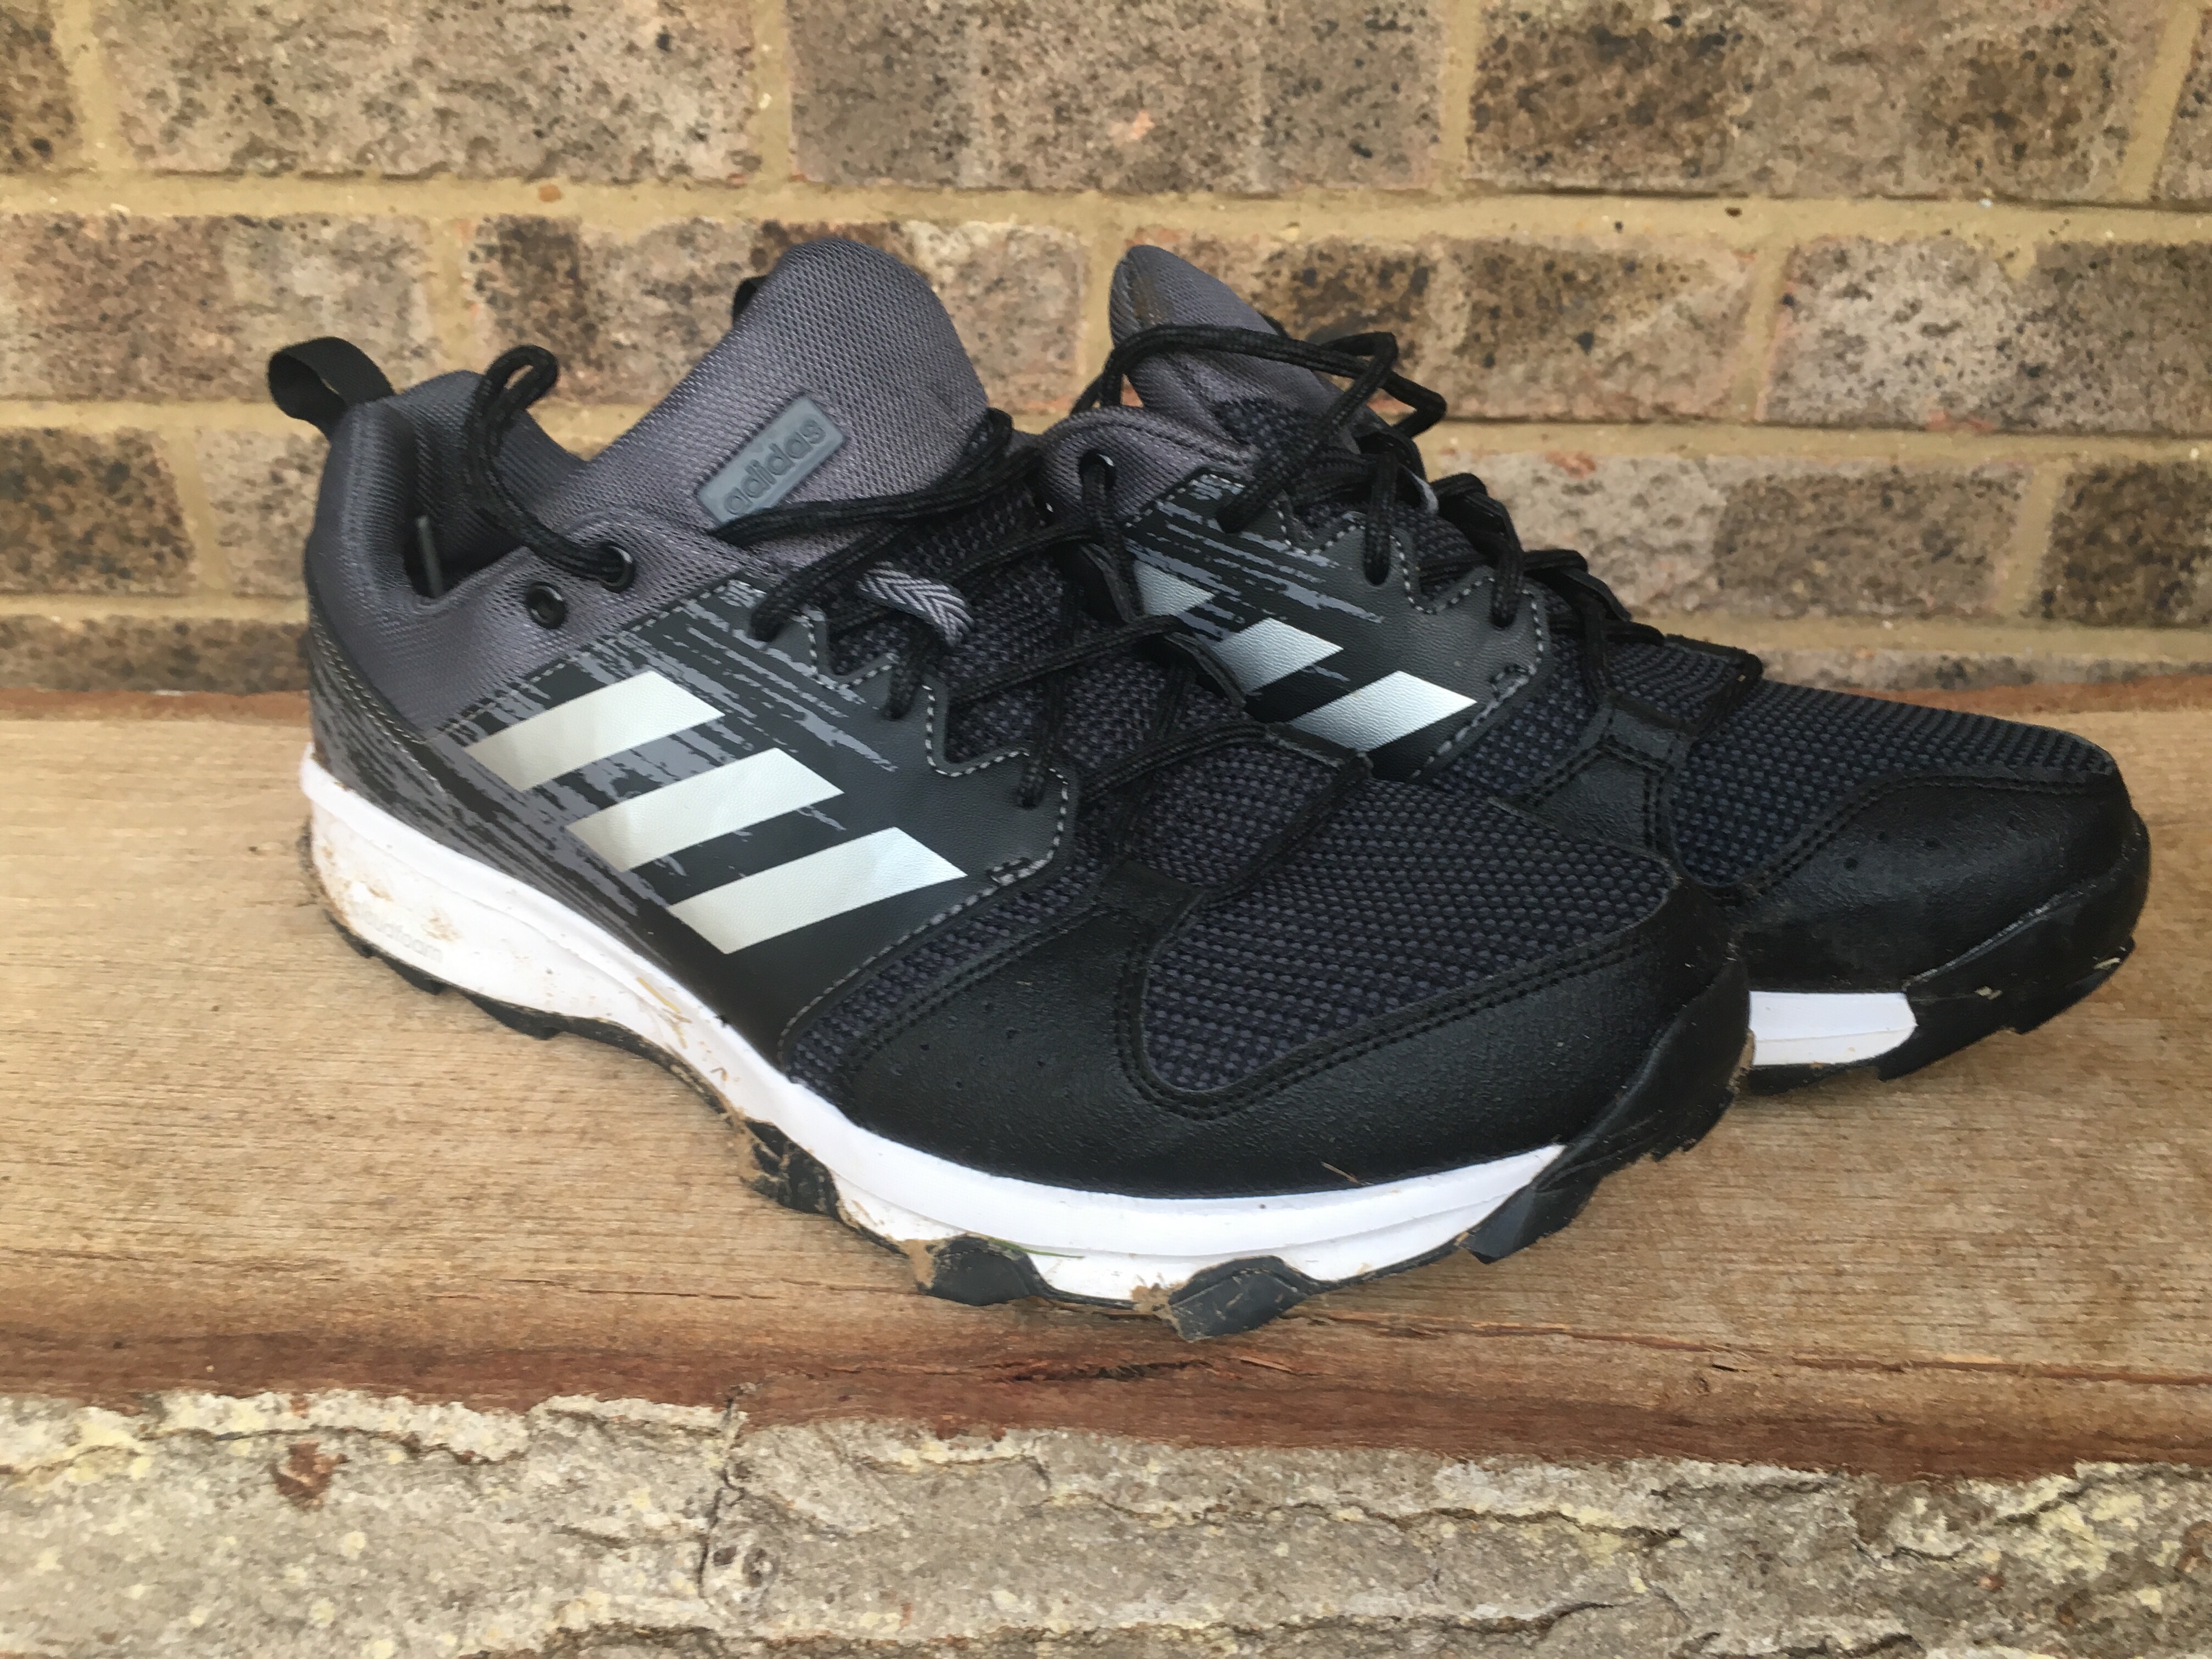 Addidas Galaxy Shoes Review | more toast